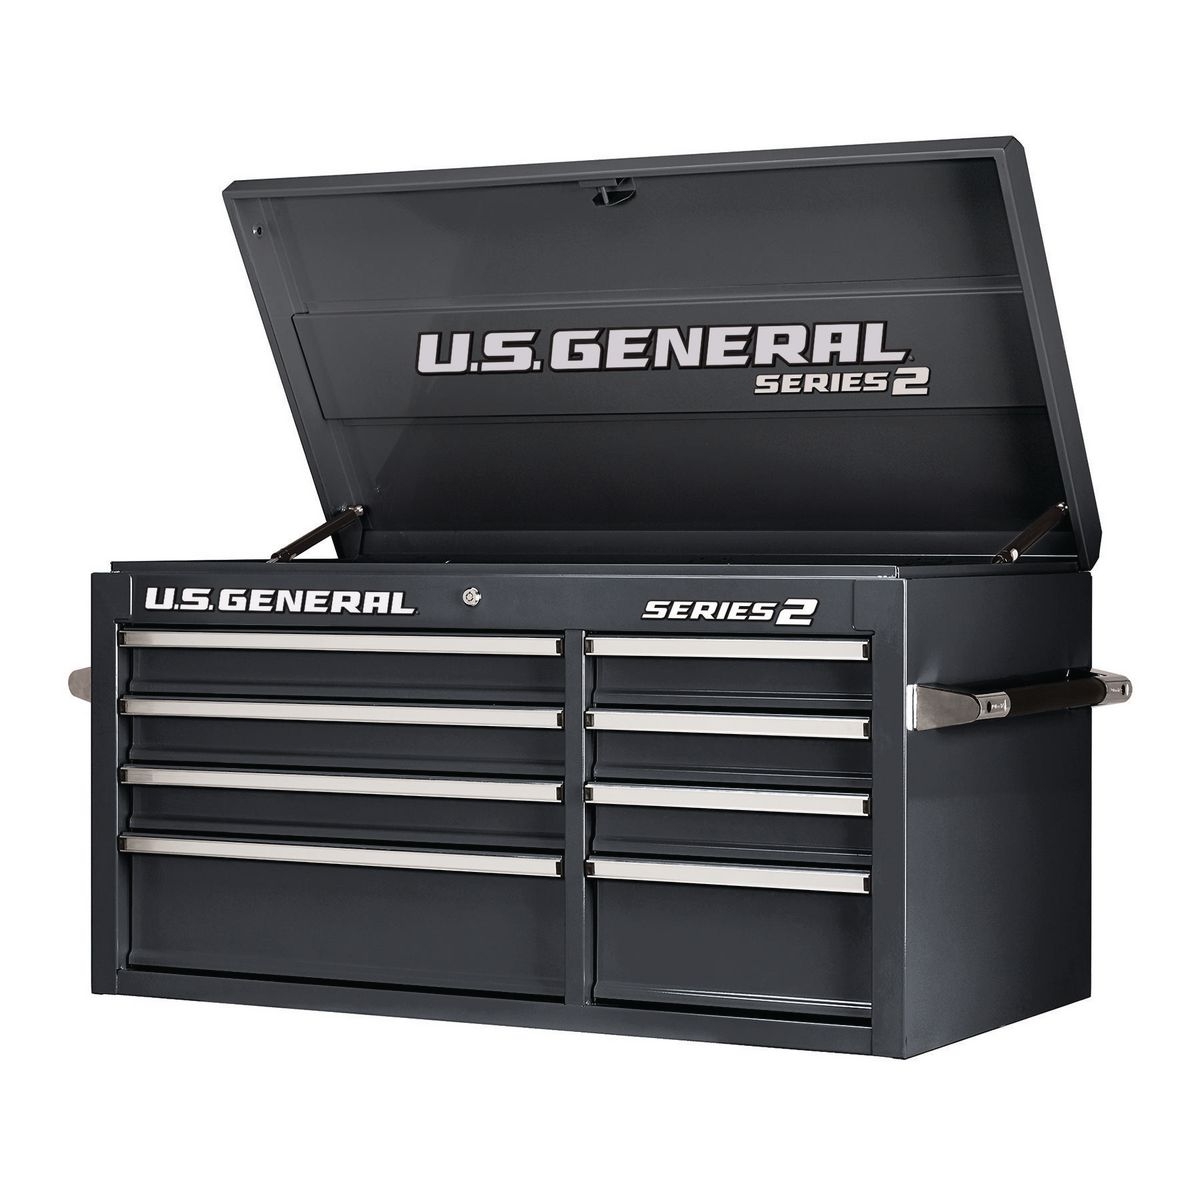 U.S. GENERAL 44 in. Double Bank Black Top Chest - Item 64437 / 64435 / 64436